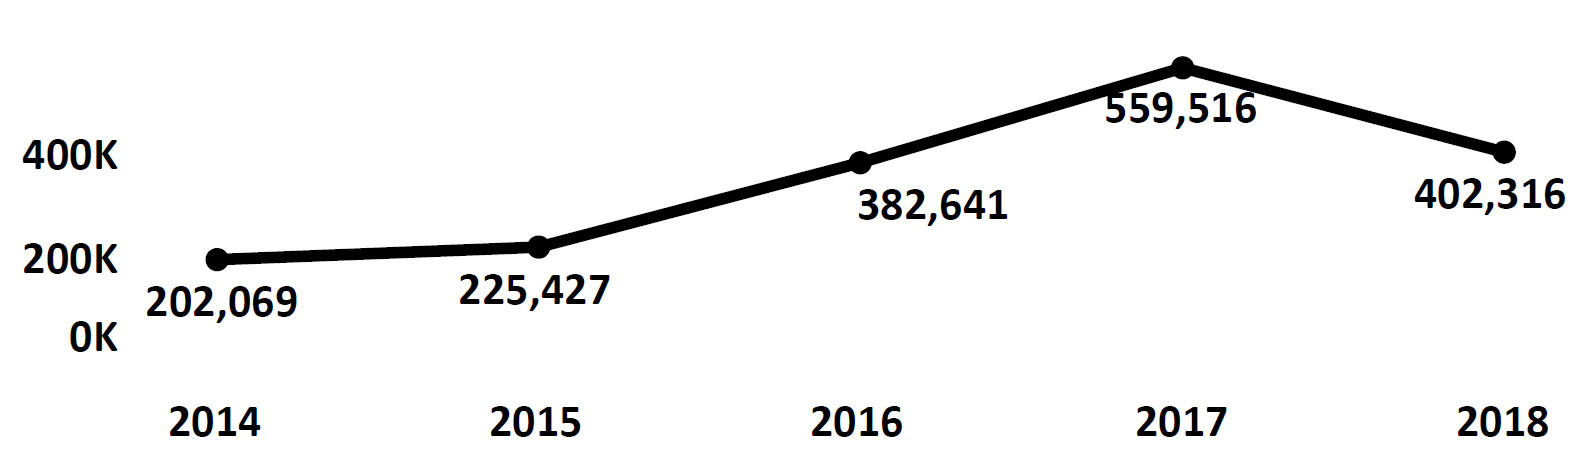 Graph of Do Not Call complaints recorded in Texas from fiscal year 2014 to fiscal year 2018. In 2014 there were 202,069 complaints filed, which increased each year peaking at 559,516 in 2017. In 2018 there were 402,316 complaints filed, fewer than 2017.